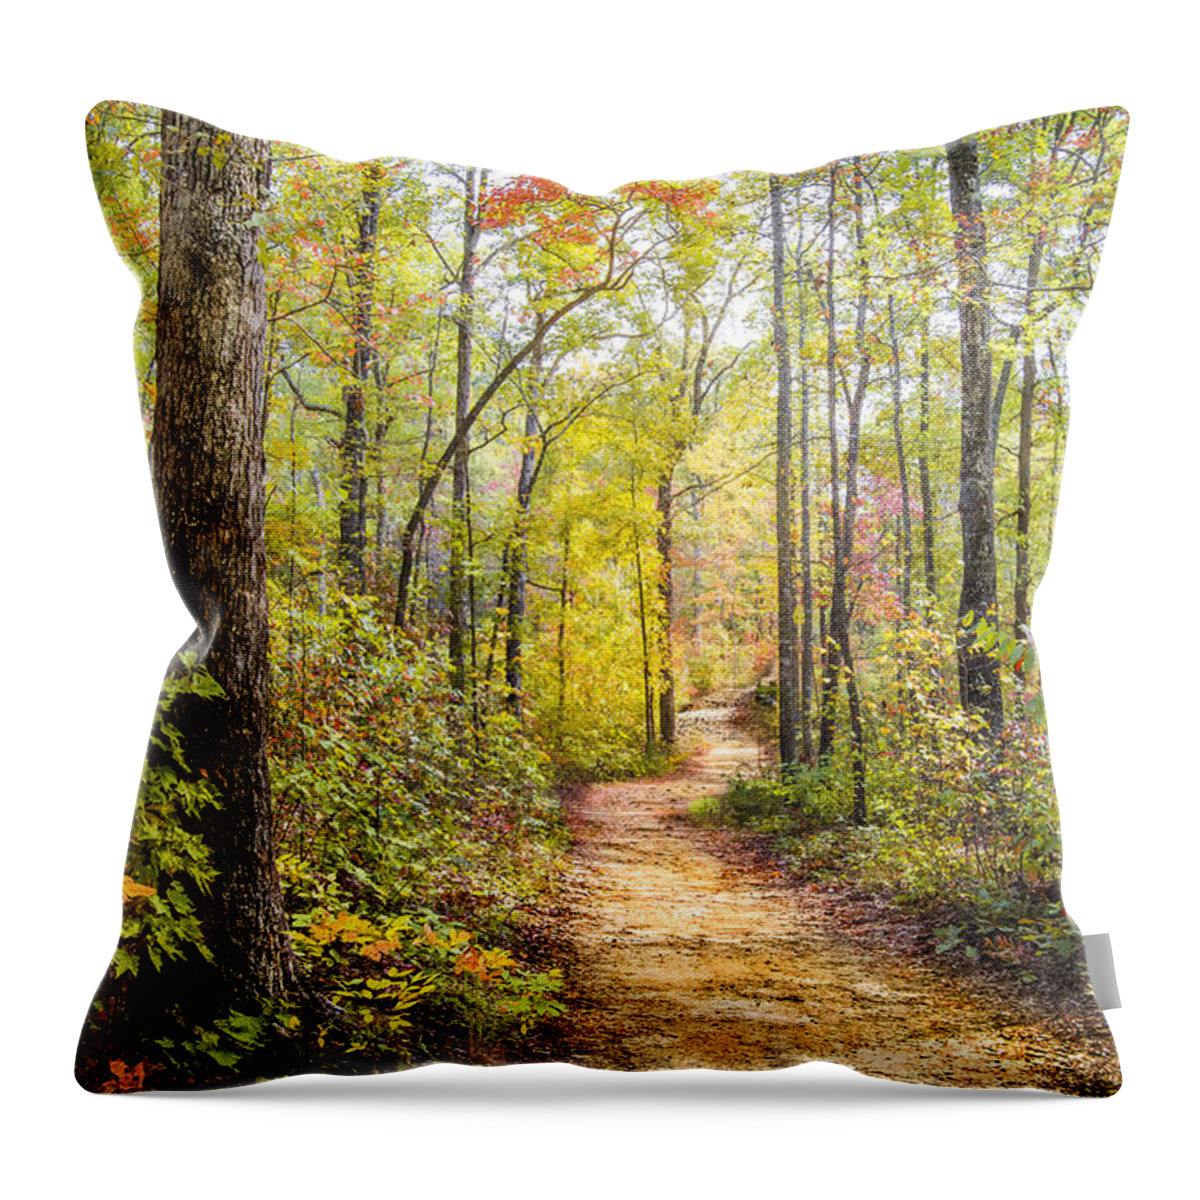 Appalachia Throw Pillow featuring the photograph Elfin Forest by Debra and Dave Vanderlaan